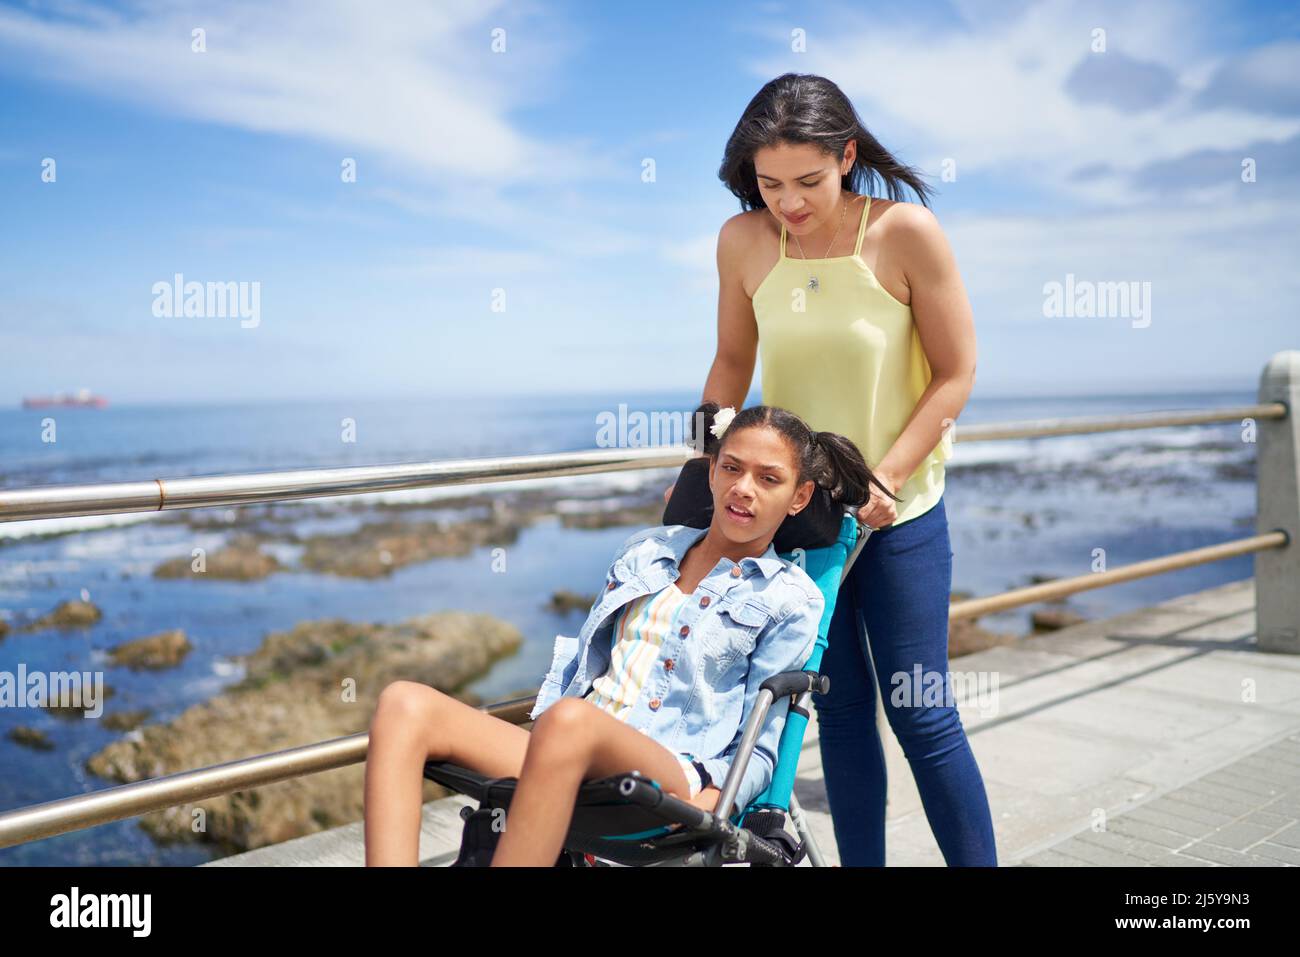 Mother pushing disabled daughter in pushchair on ocean boardwalk Stock Photo